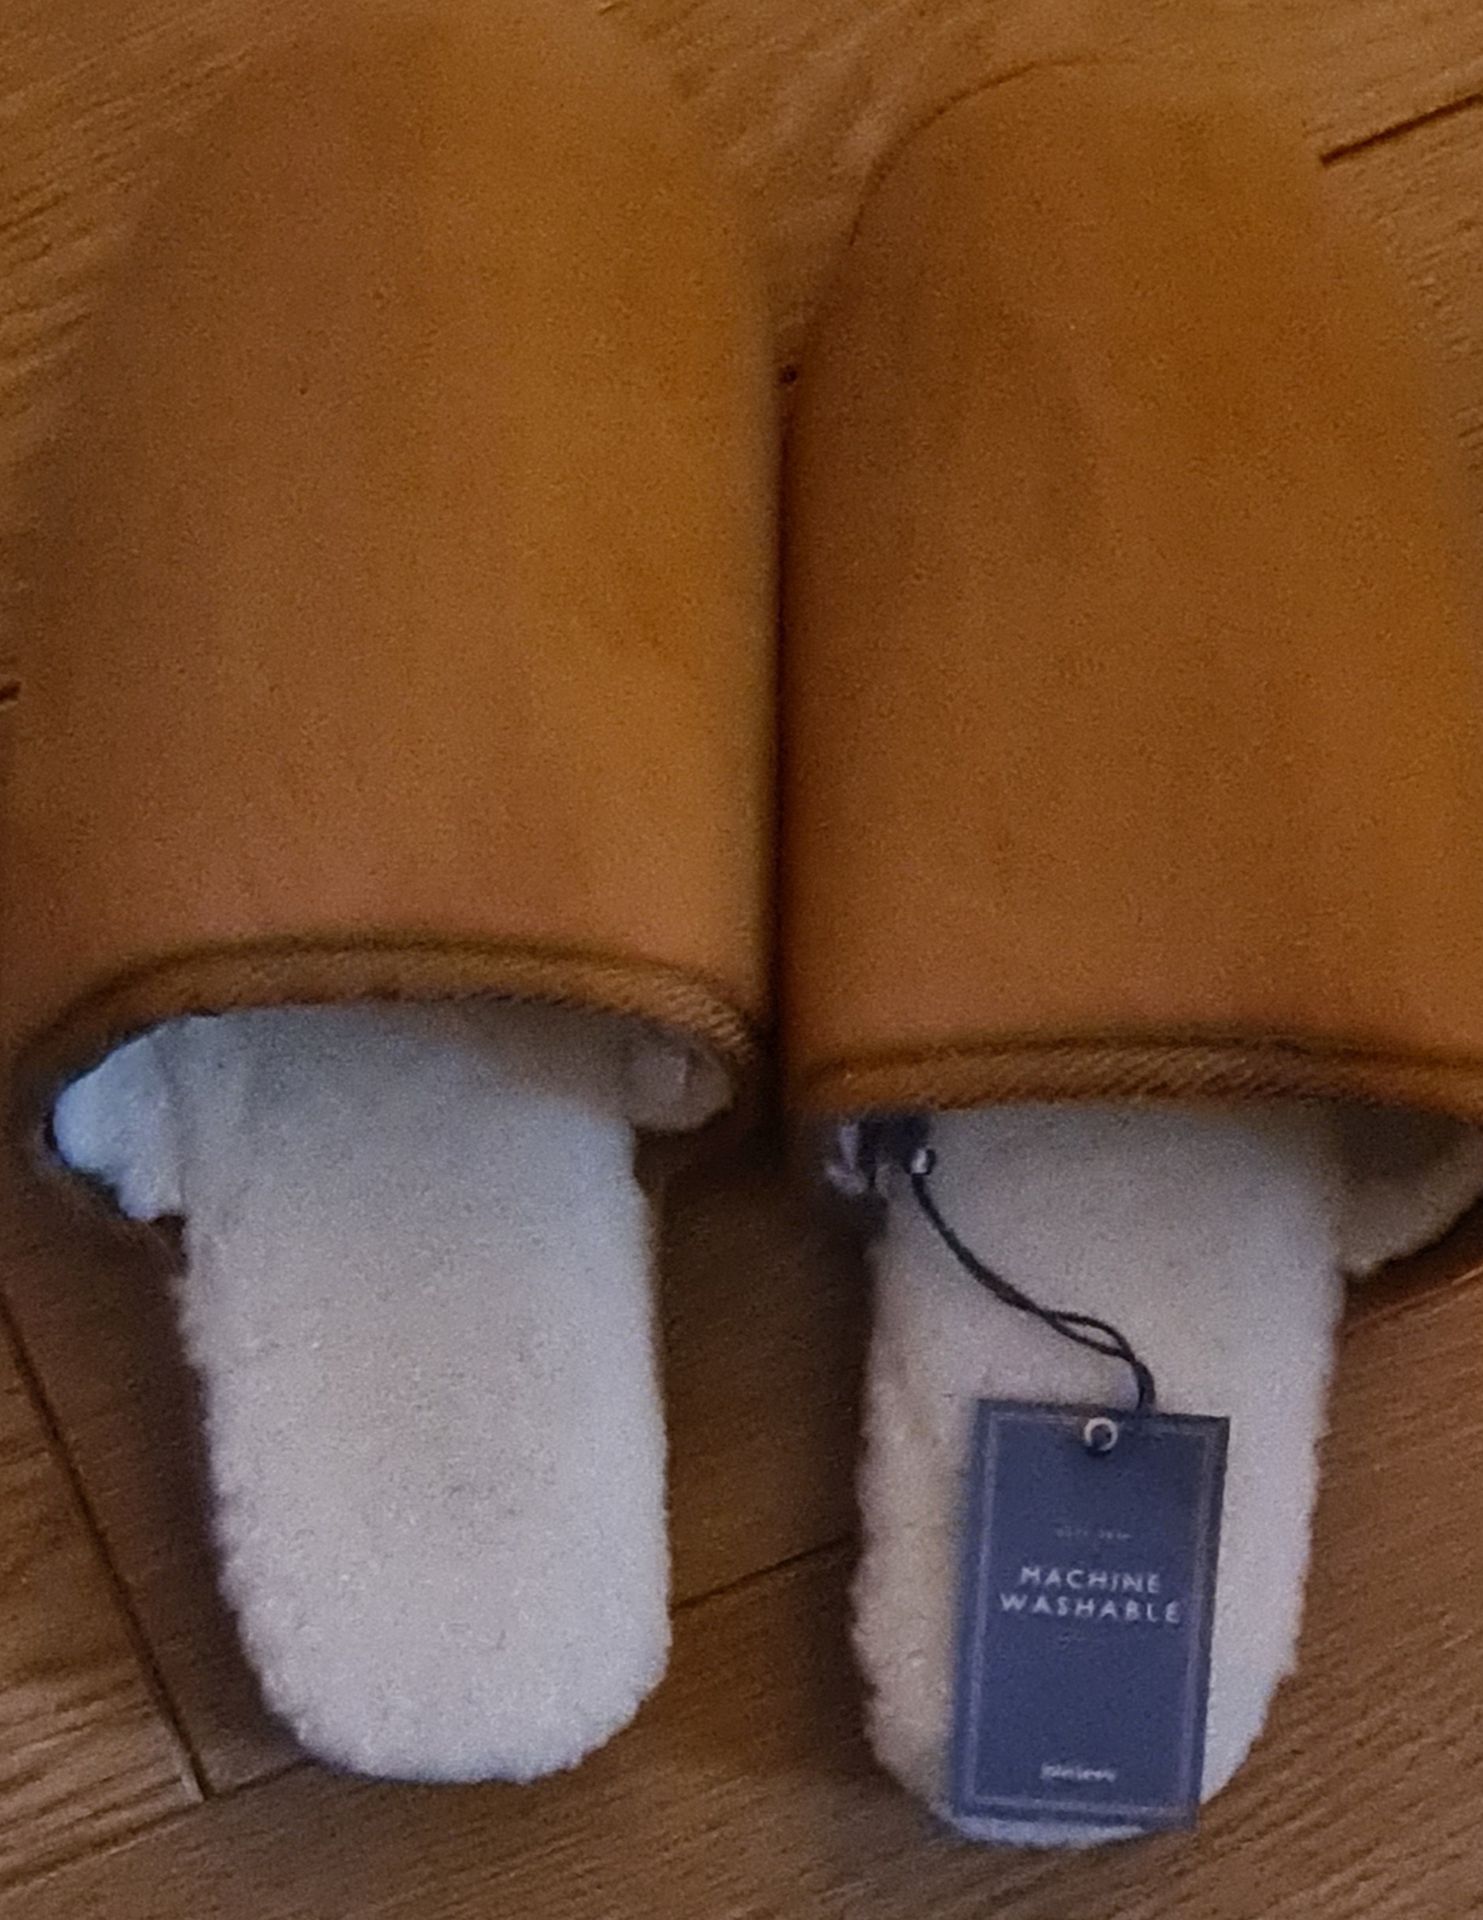 10 Sets Brand New John Lewis Slippers Size M RRP £20.00 Each